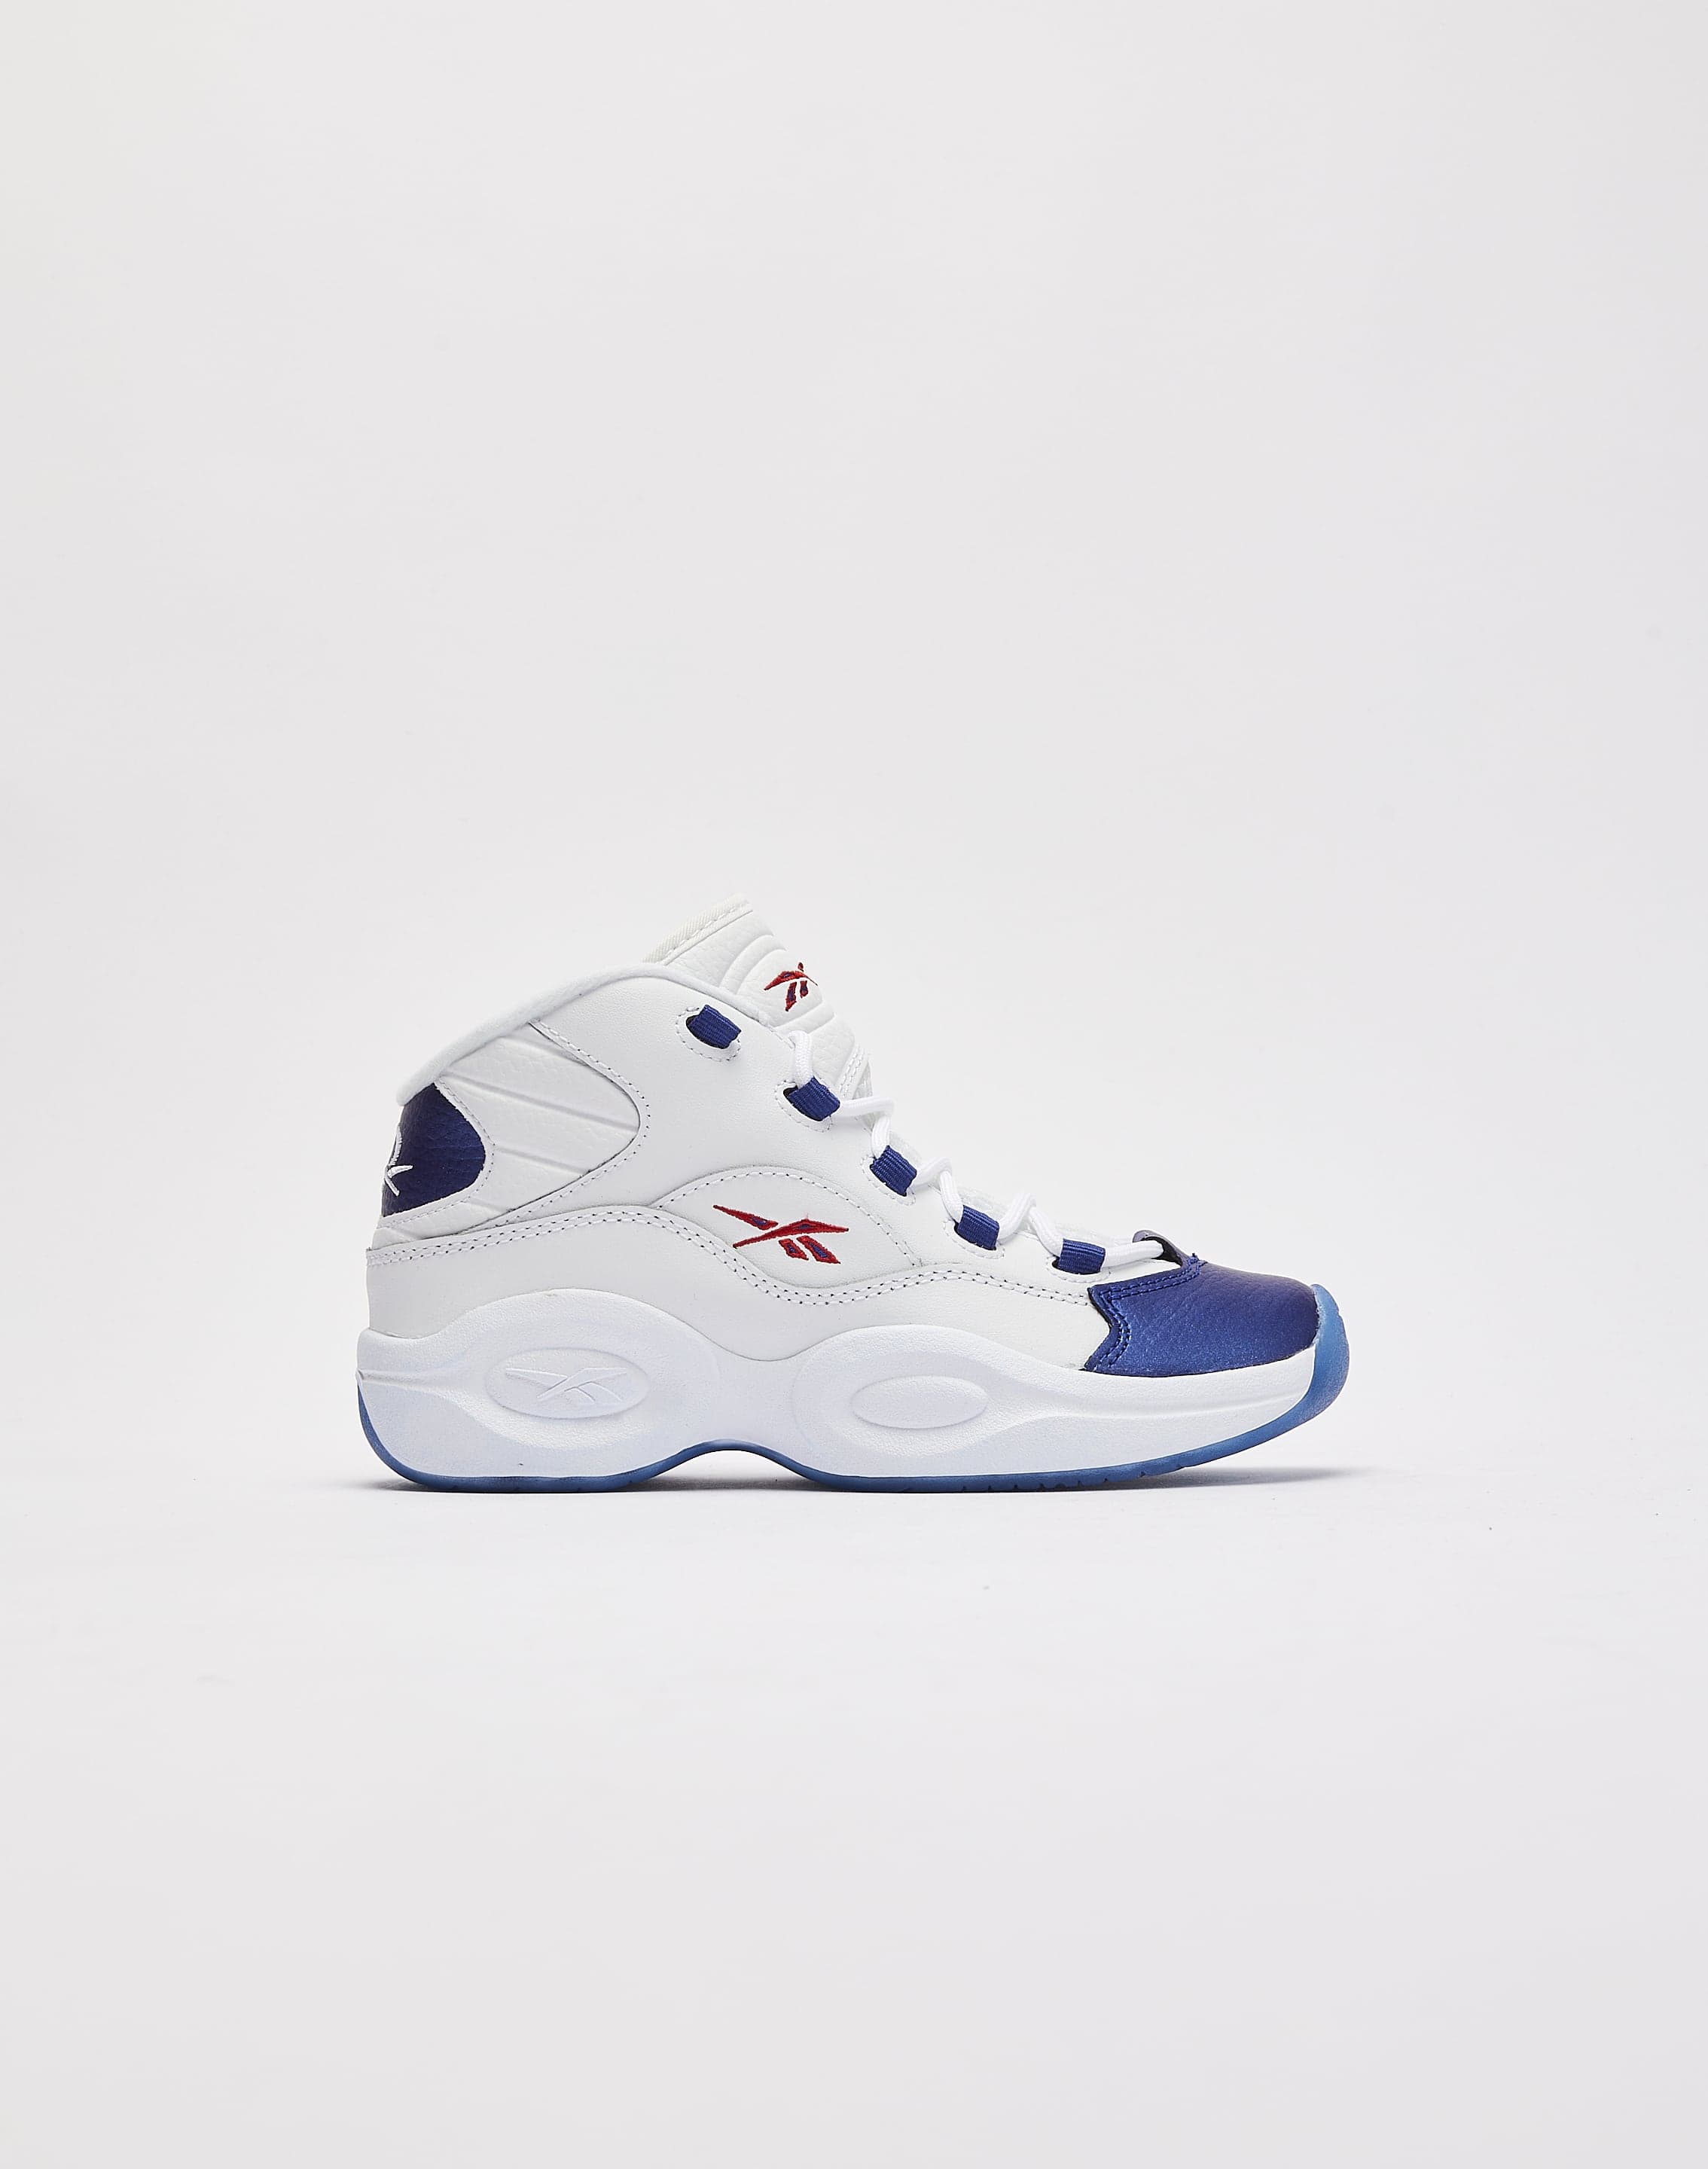 Blue Toe' Reebok Question Mids Available Early